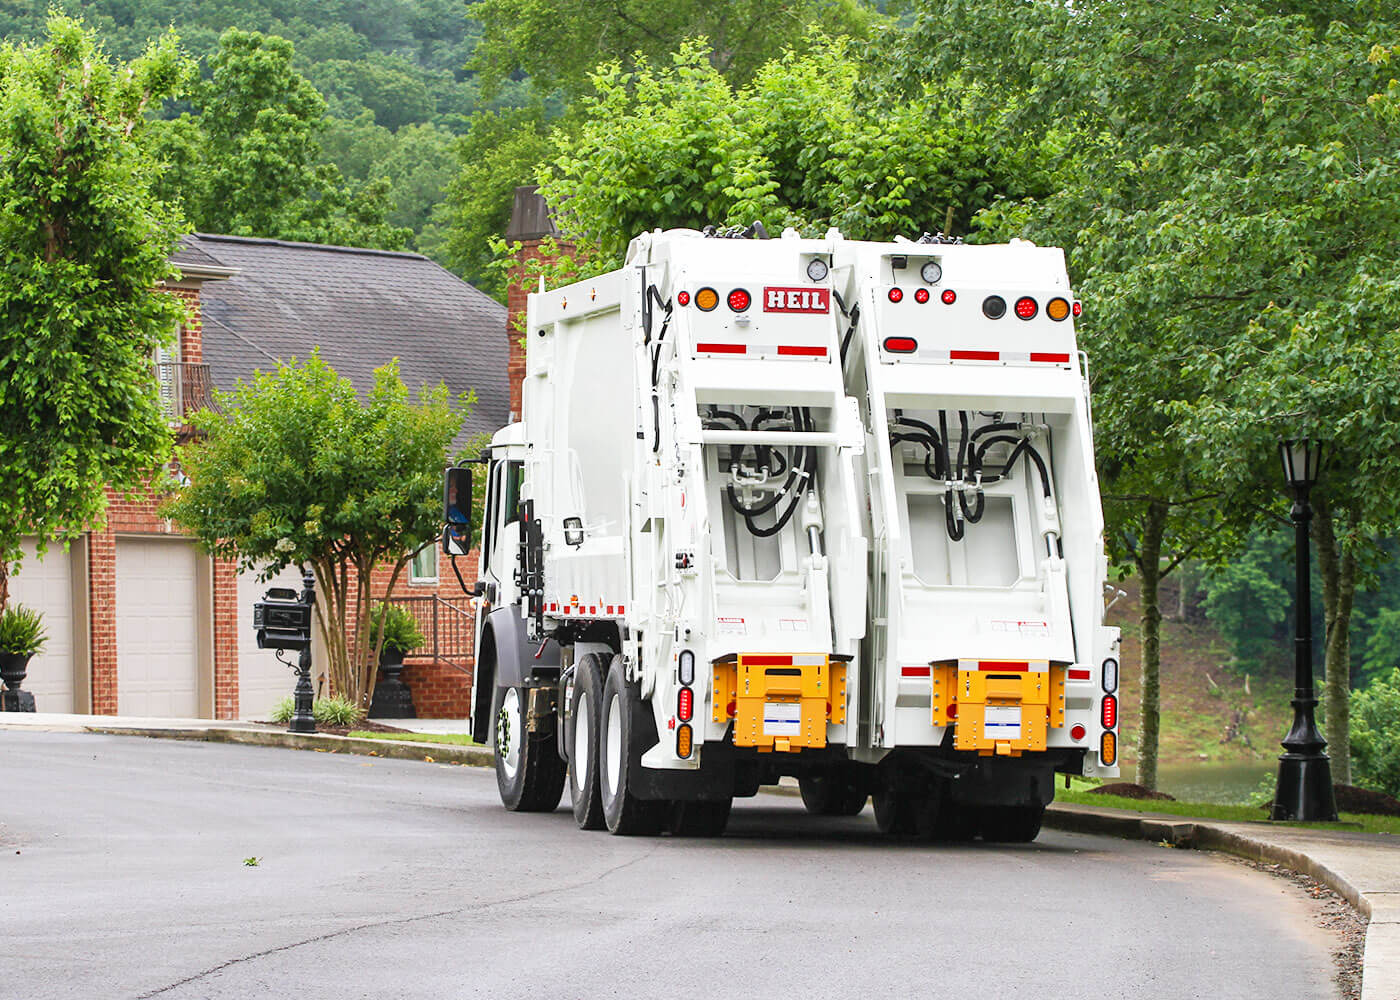 Rear loader trash truck with two compartment split for dual collection